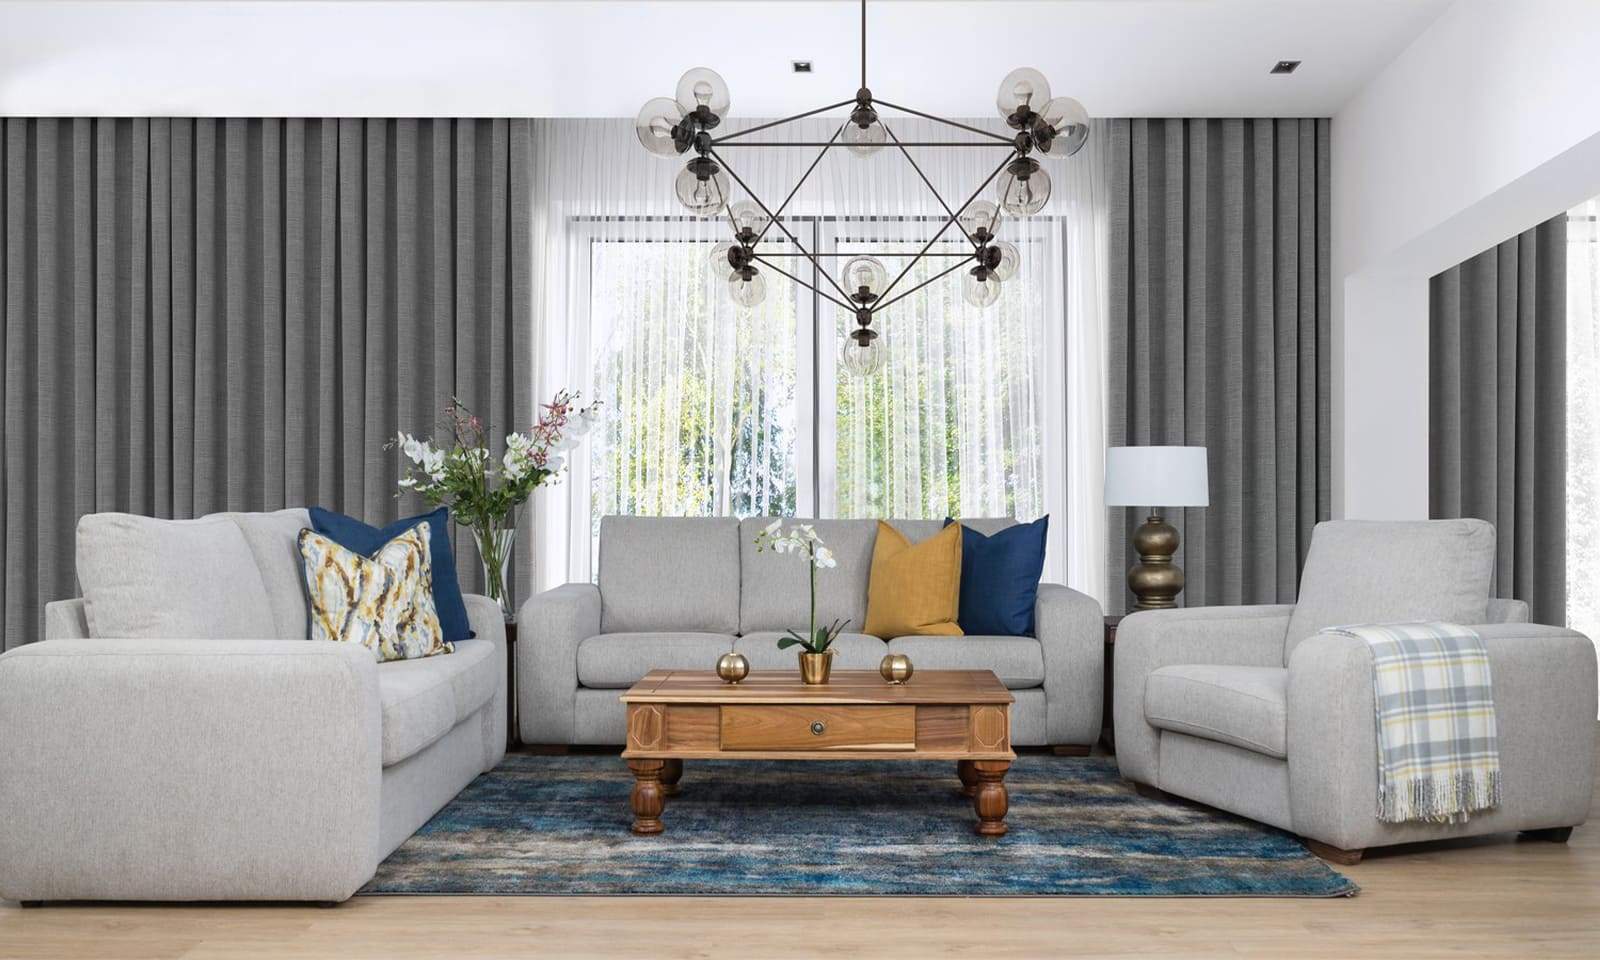 HOW TO STYLE A MODERN FARMHOUSE INSPIRED LIVING ROOM